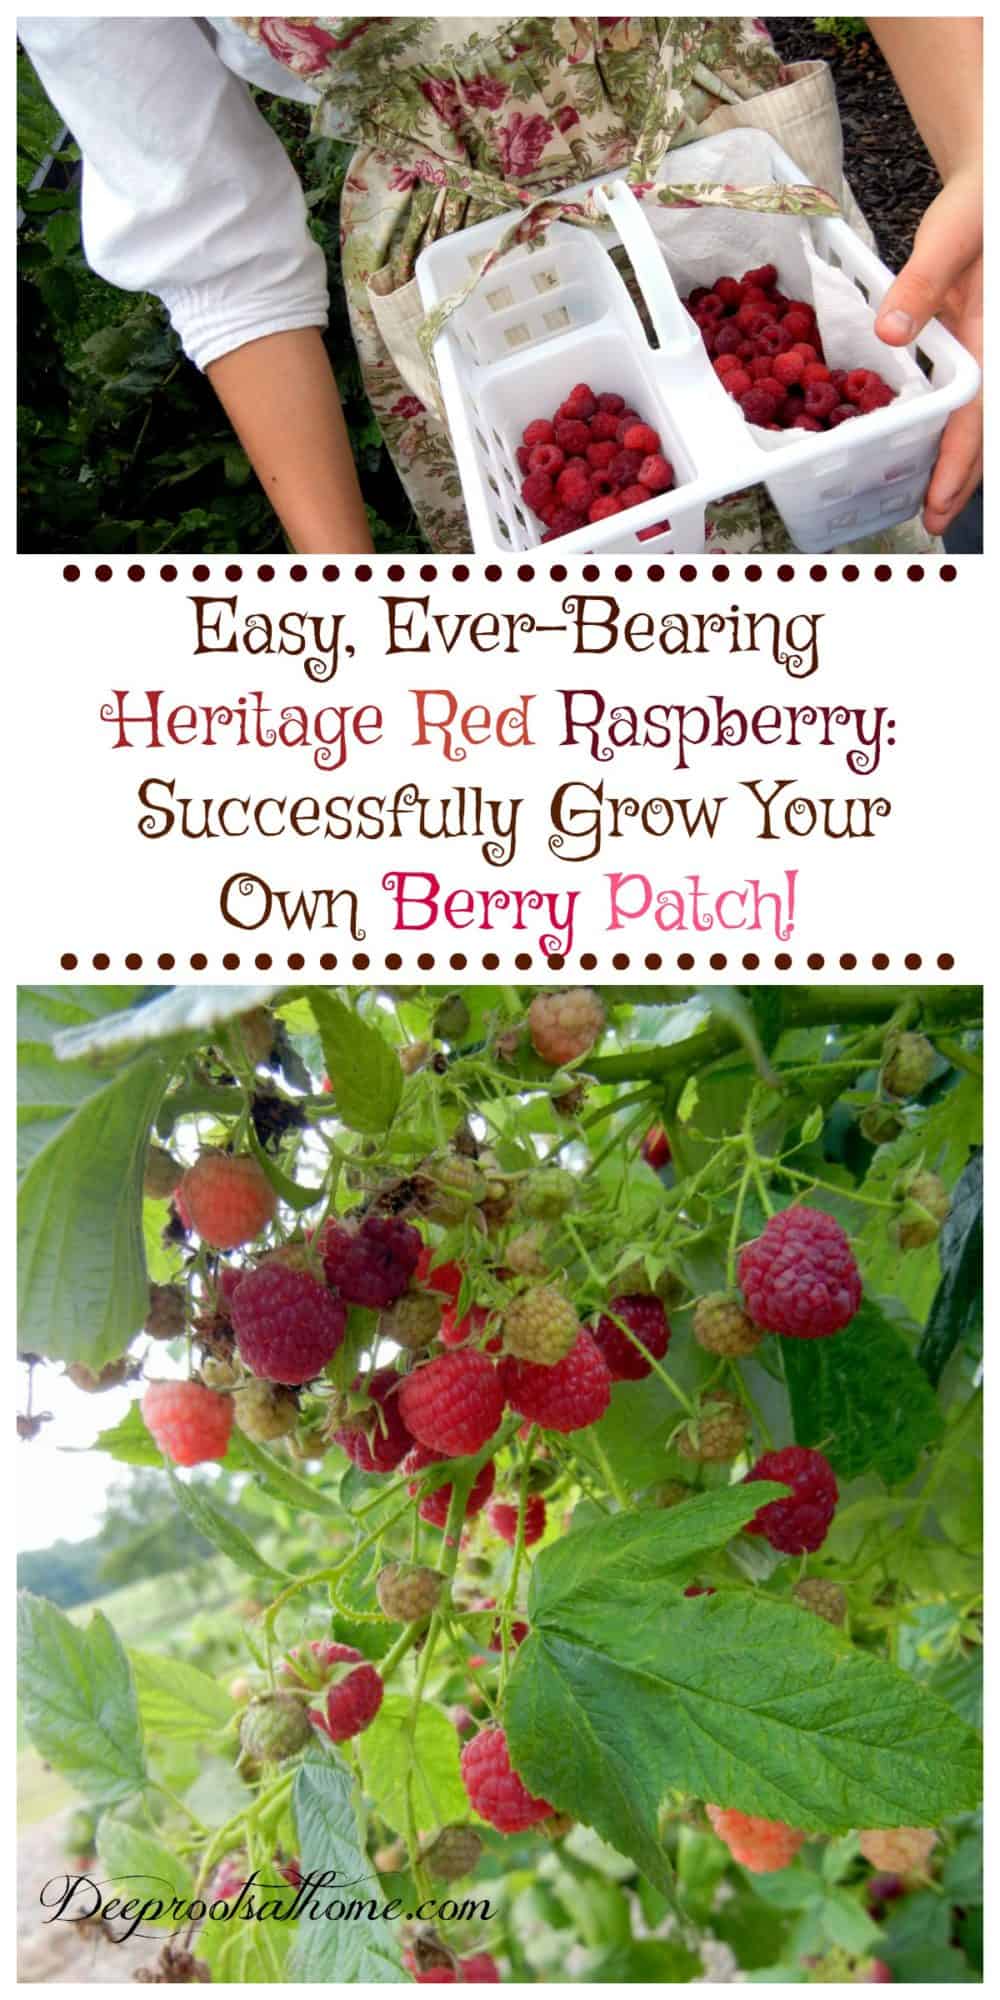 Easy Ever-Bearing Heritage Raspberry: Successfully Grow Your Own Berry Patch. Pinterest image